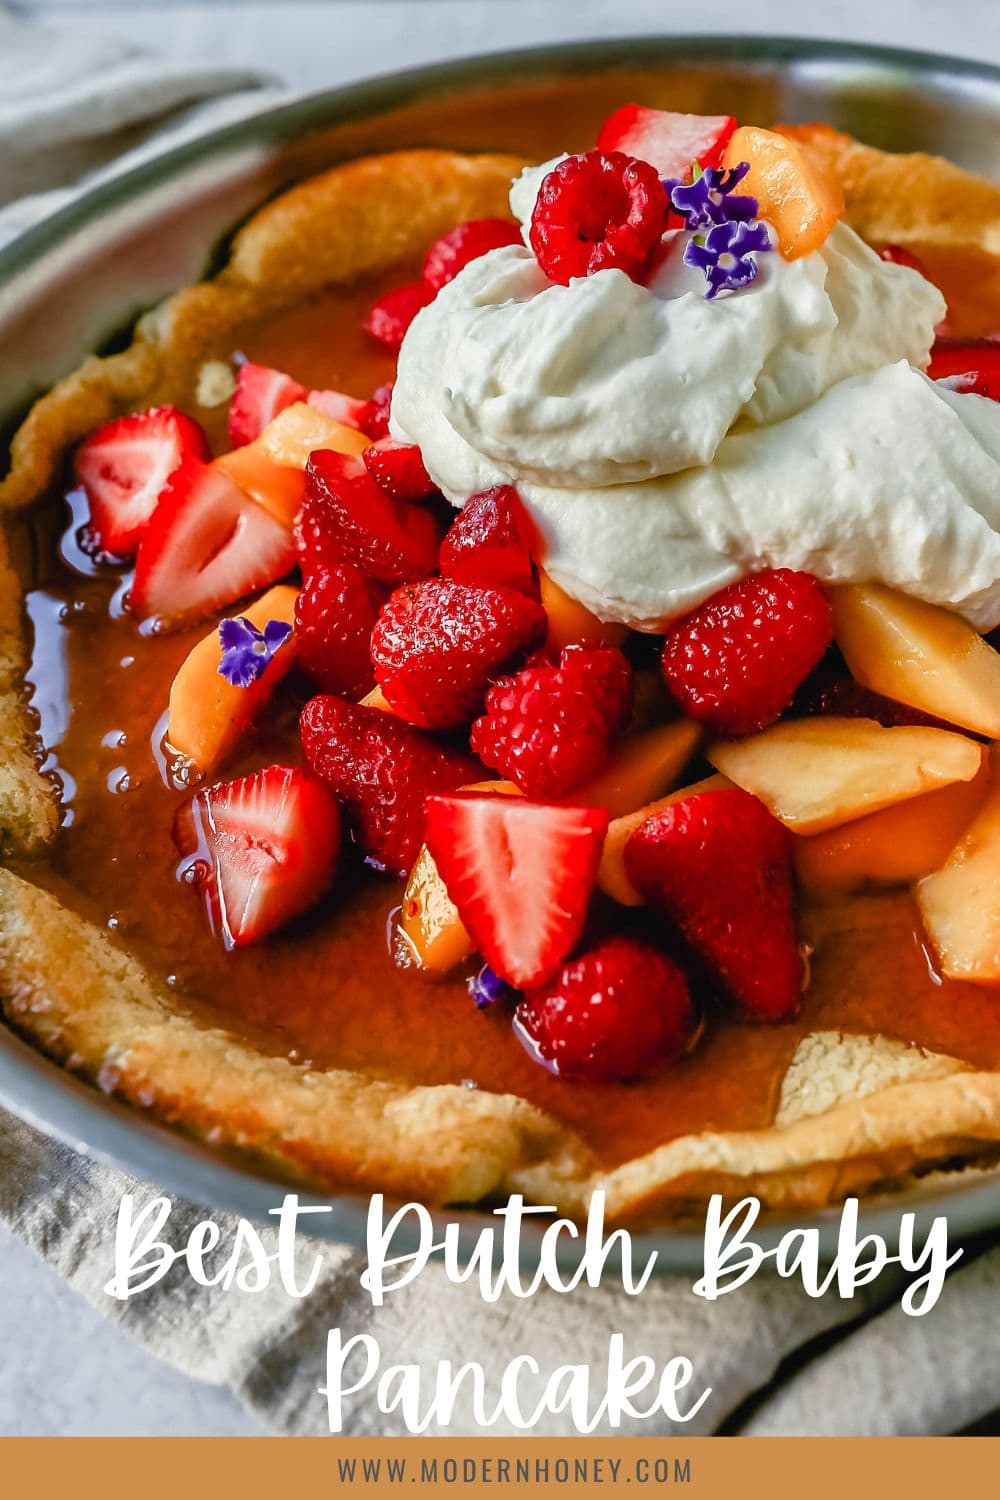 A decadent Dutch Baby Puff Pancake is made with milk, eggs, sugar, flour, and vanilla, and baked in a cast iron skillet in the oven until it puffs up and becomes a golden brown. A delicious and easy breakfast dish!